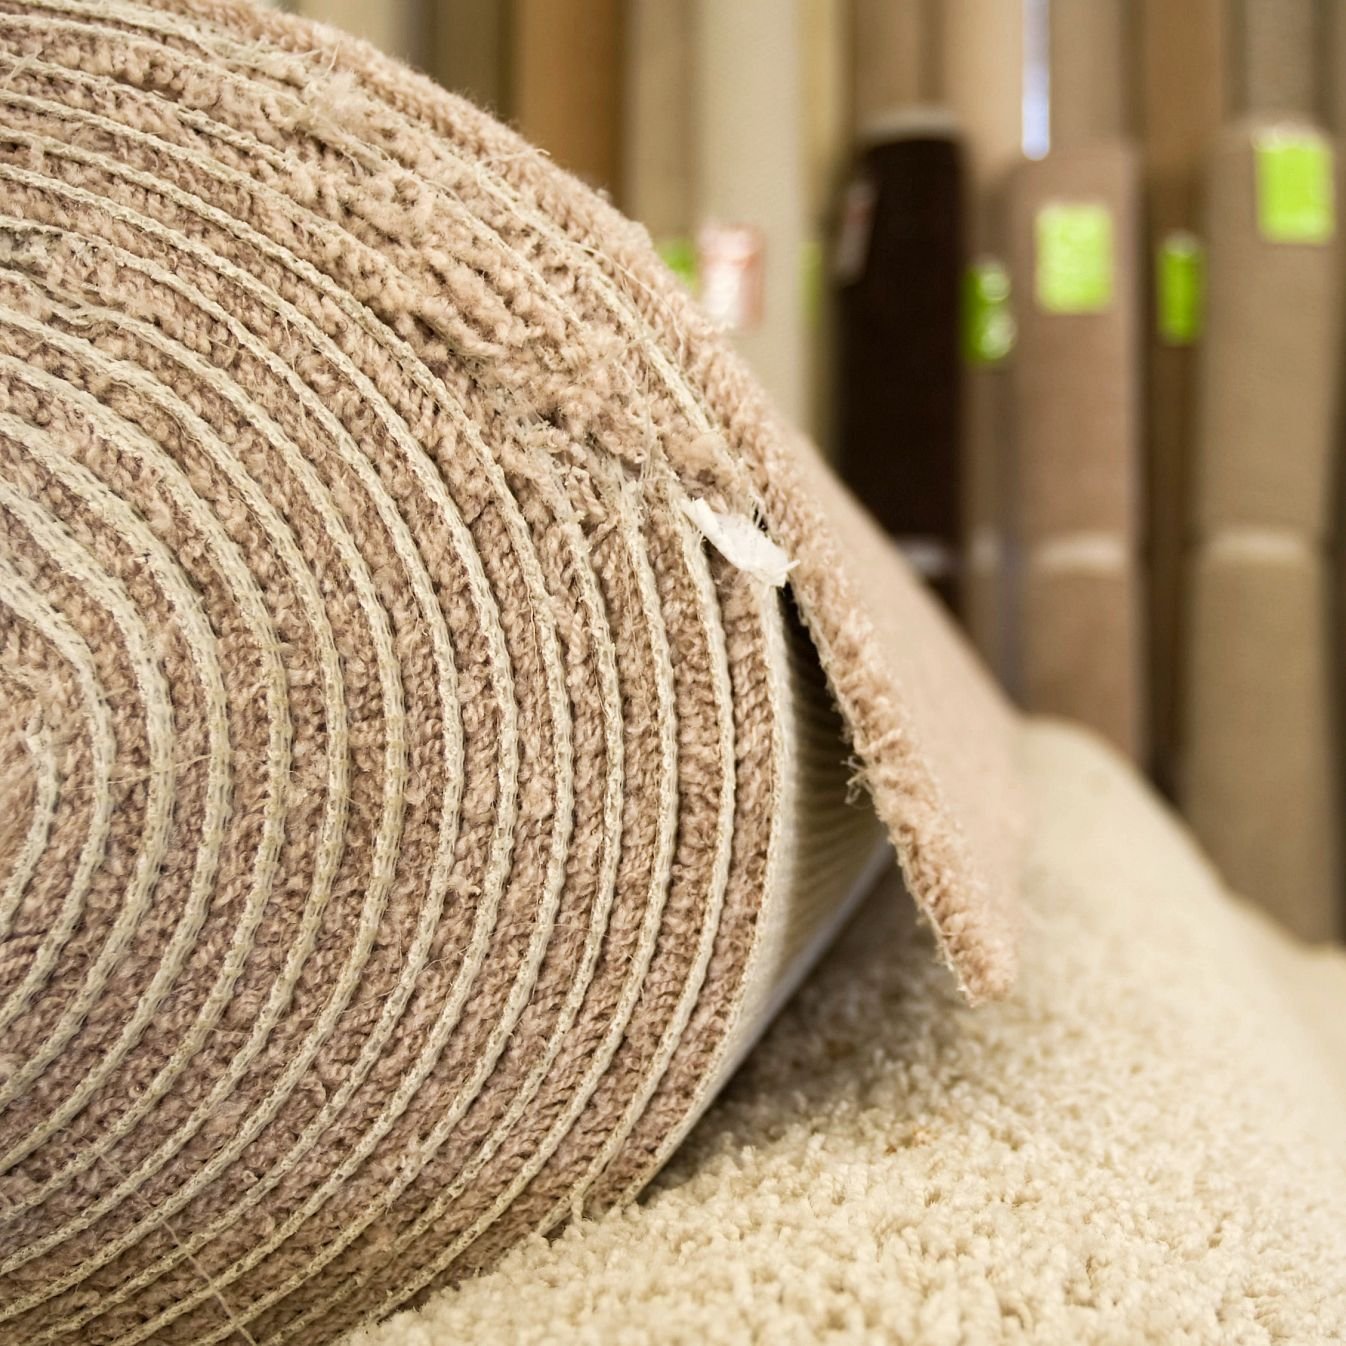 Roll of Carpet in front of other Rolls of Carpet From Walnut Carpet | 16790 East Johnson Drive, El Monte, California 91745